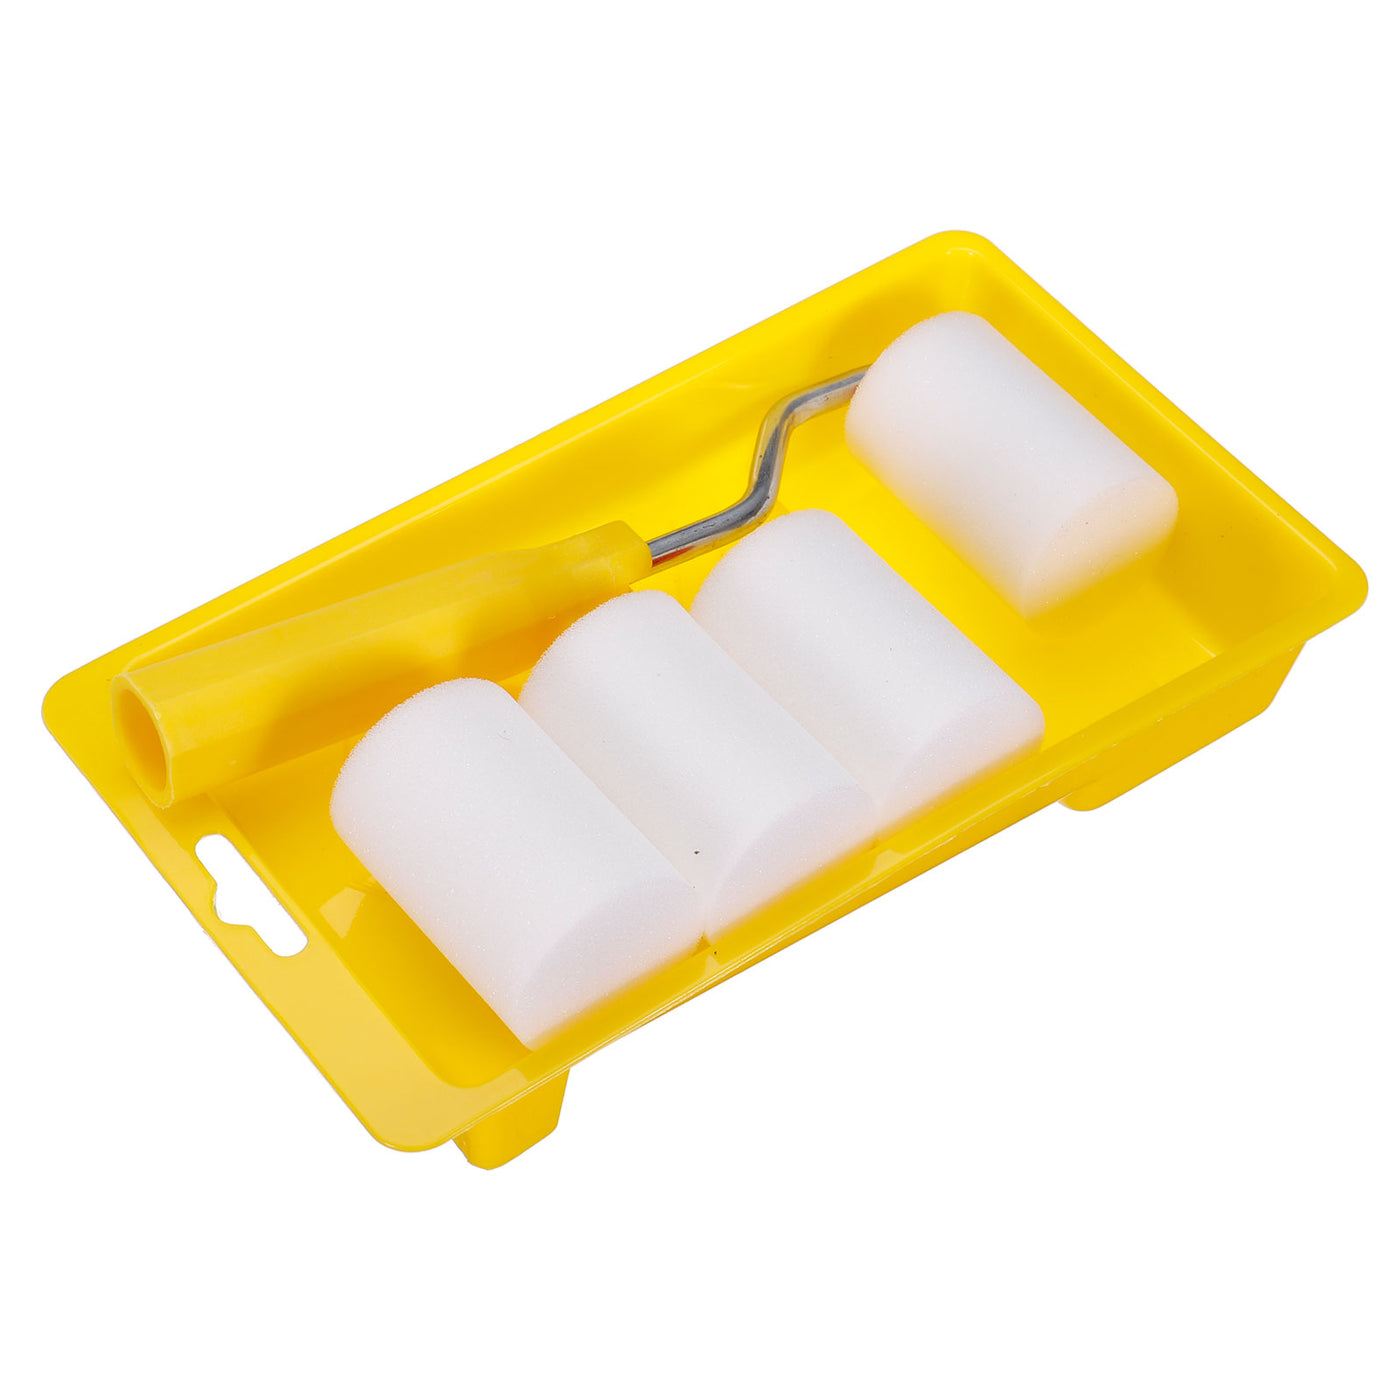 uxcell Uxcell 6Pcs Paint Roller Kit, 2" White Water-Based Foam Paint Rollers, Tray, 17cm Frame